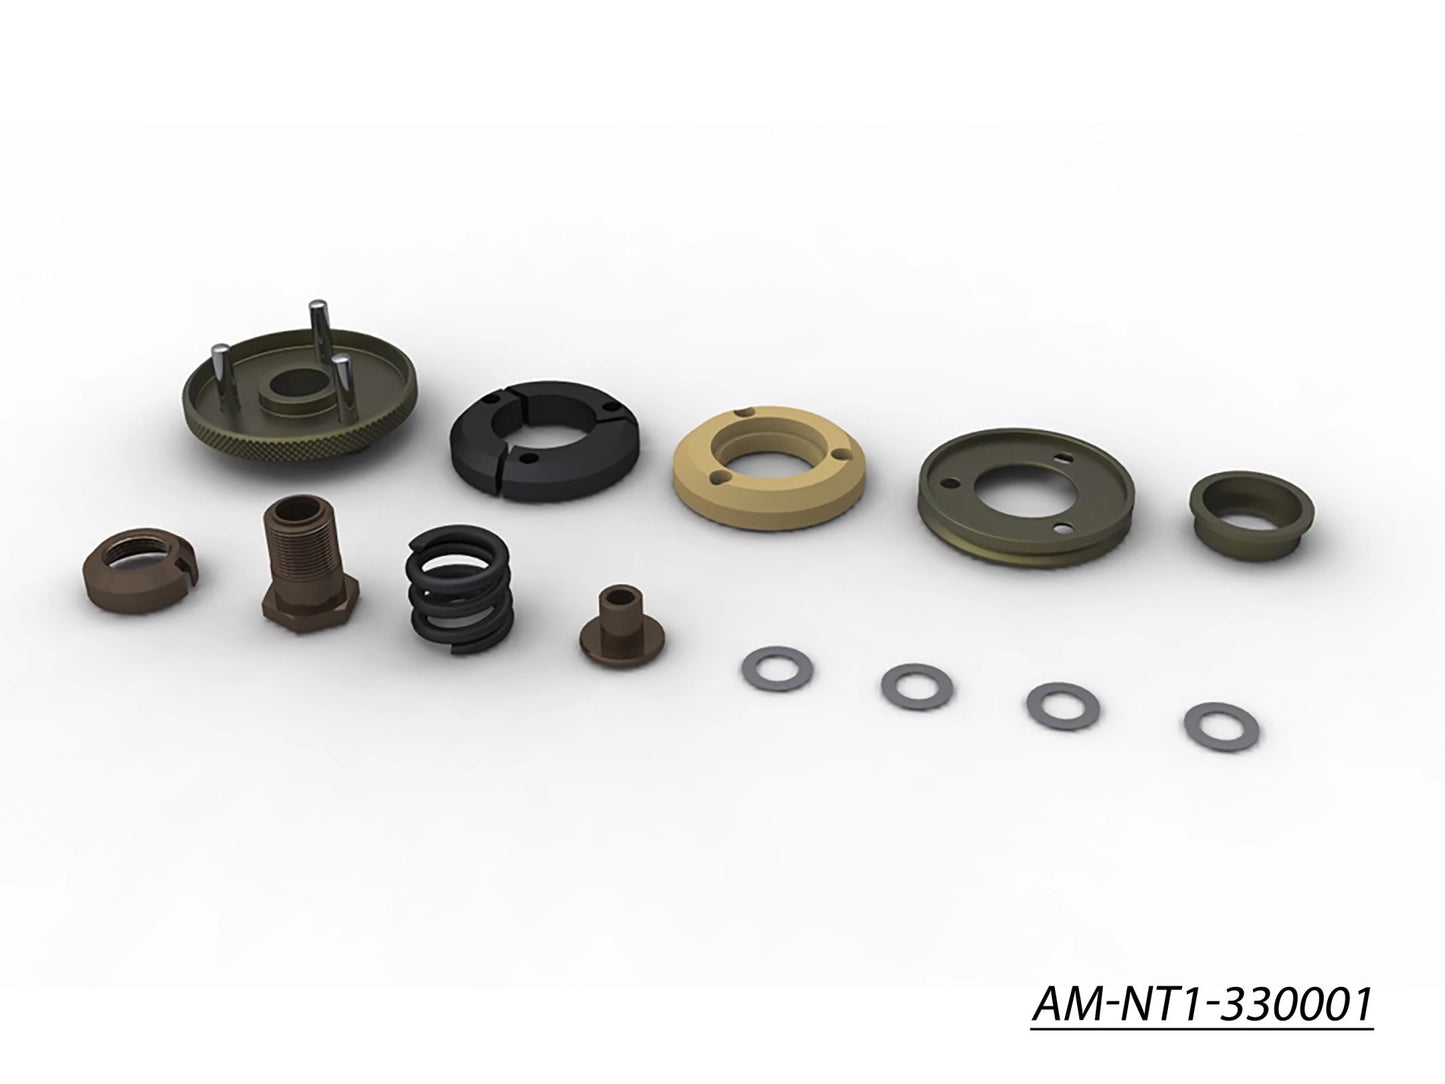 Clutch Set For NT1 (AM-NT1-330001)